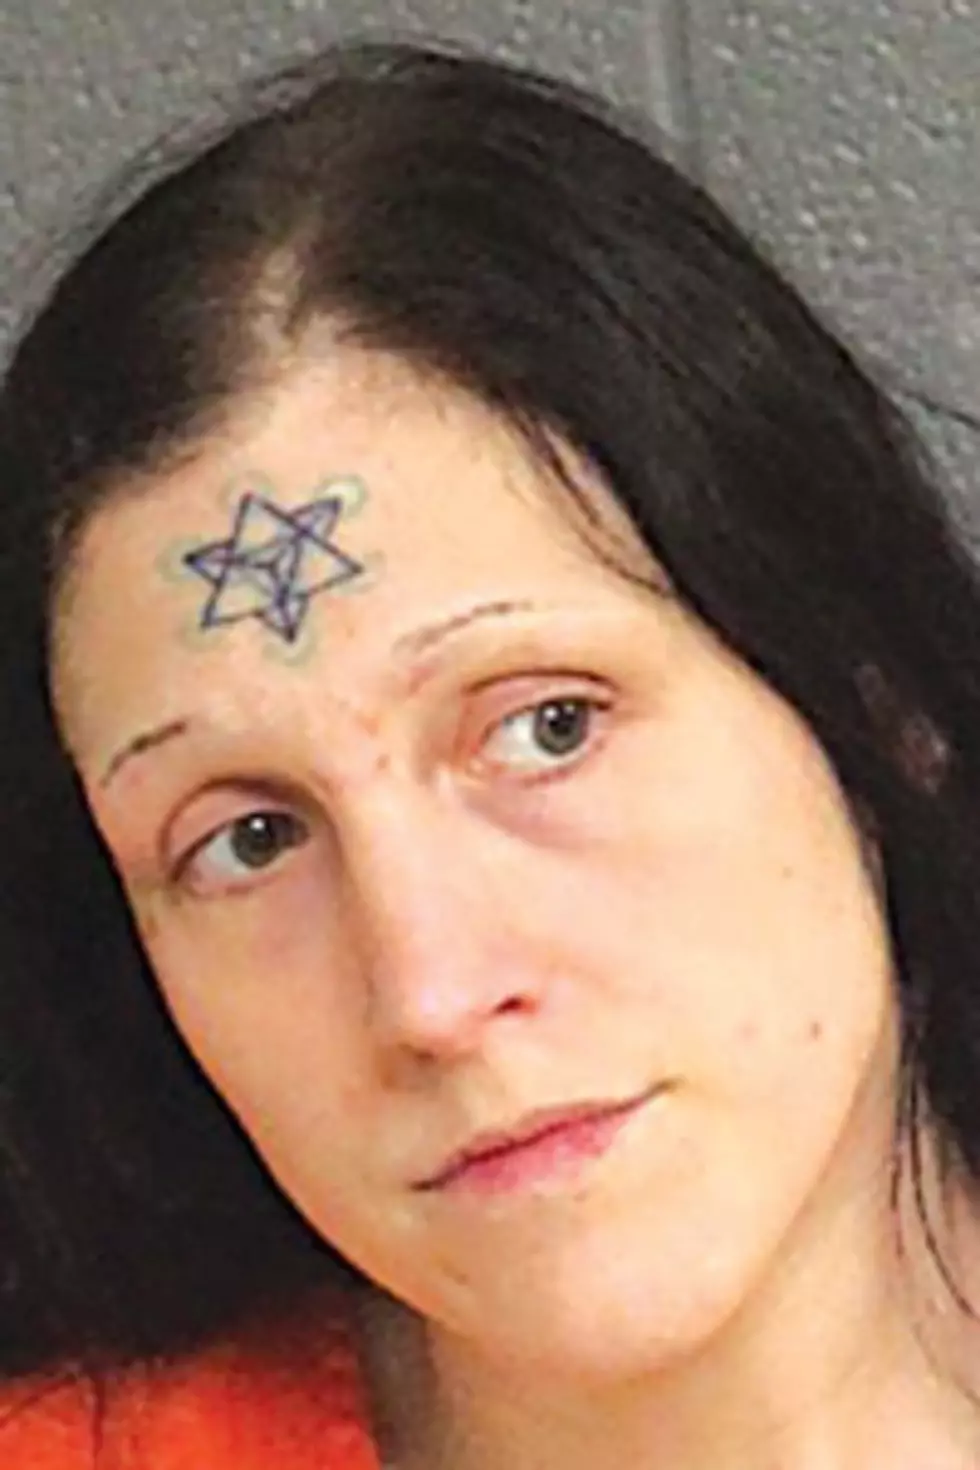 Woman&#8217;s Forehead Tattoo Leads To Arrest After Covering Face With Bandana